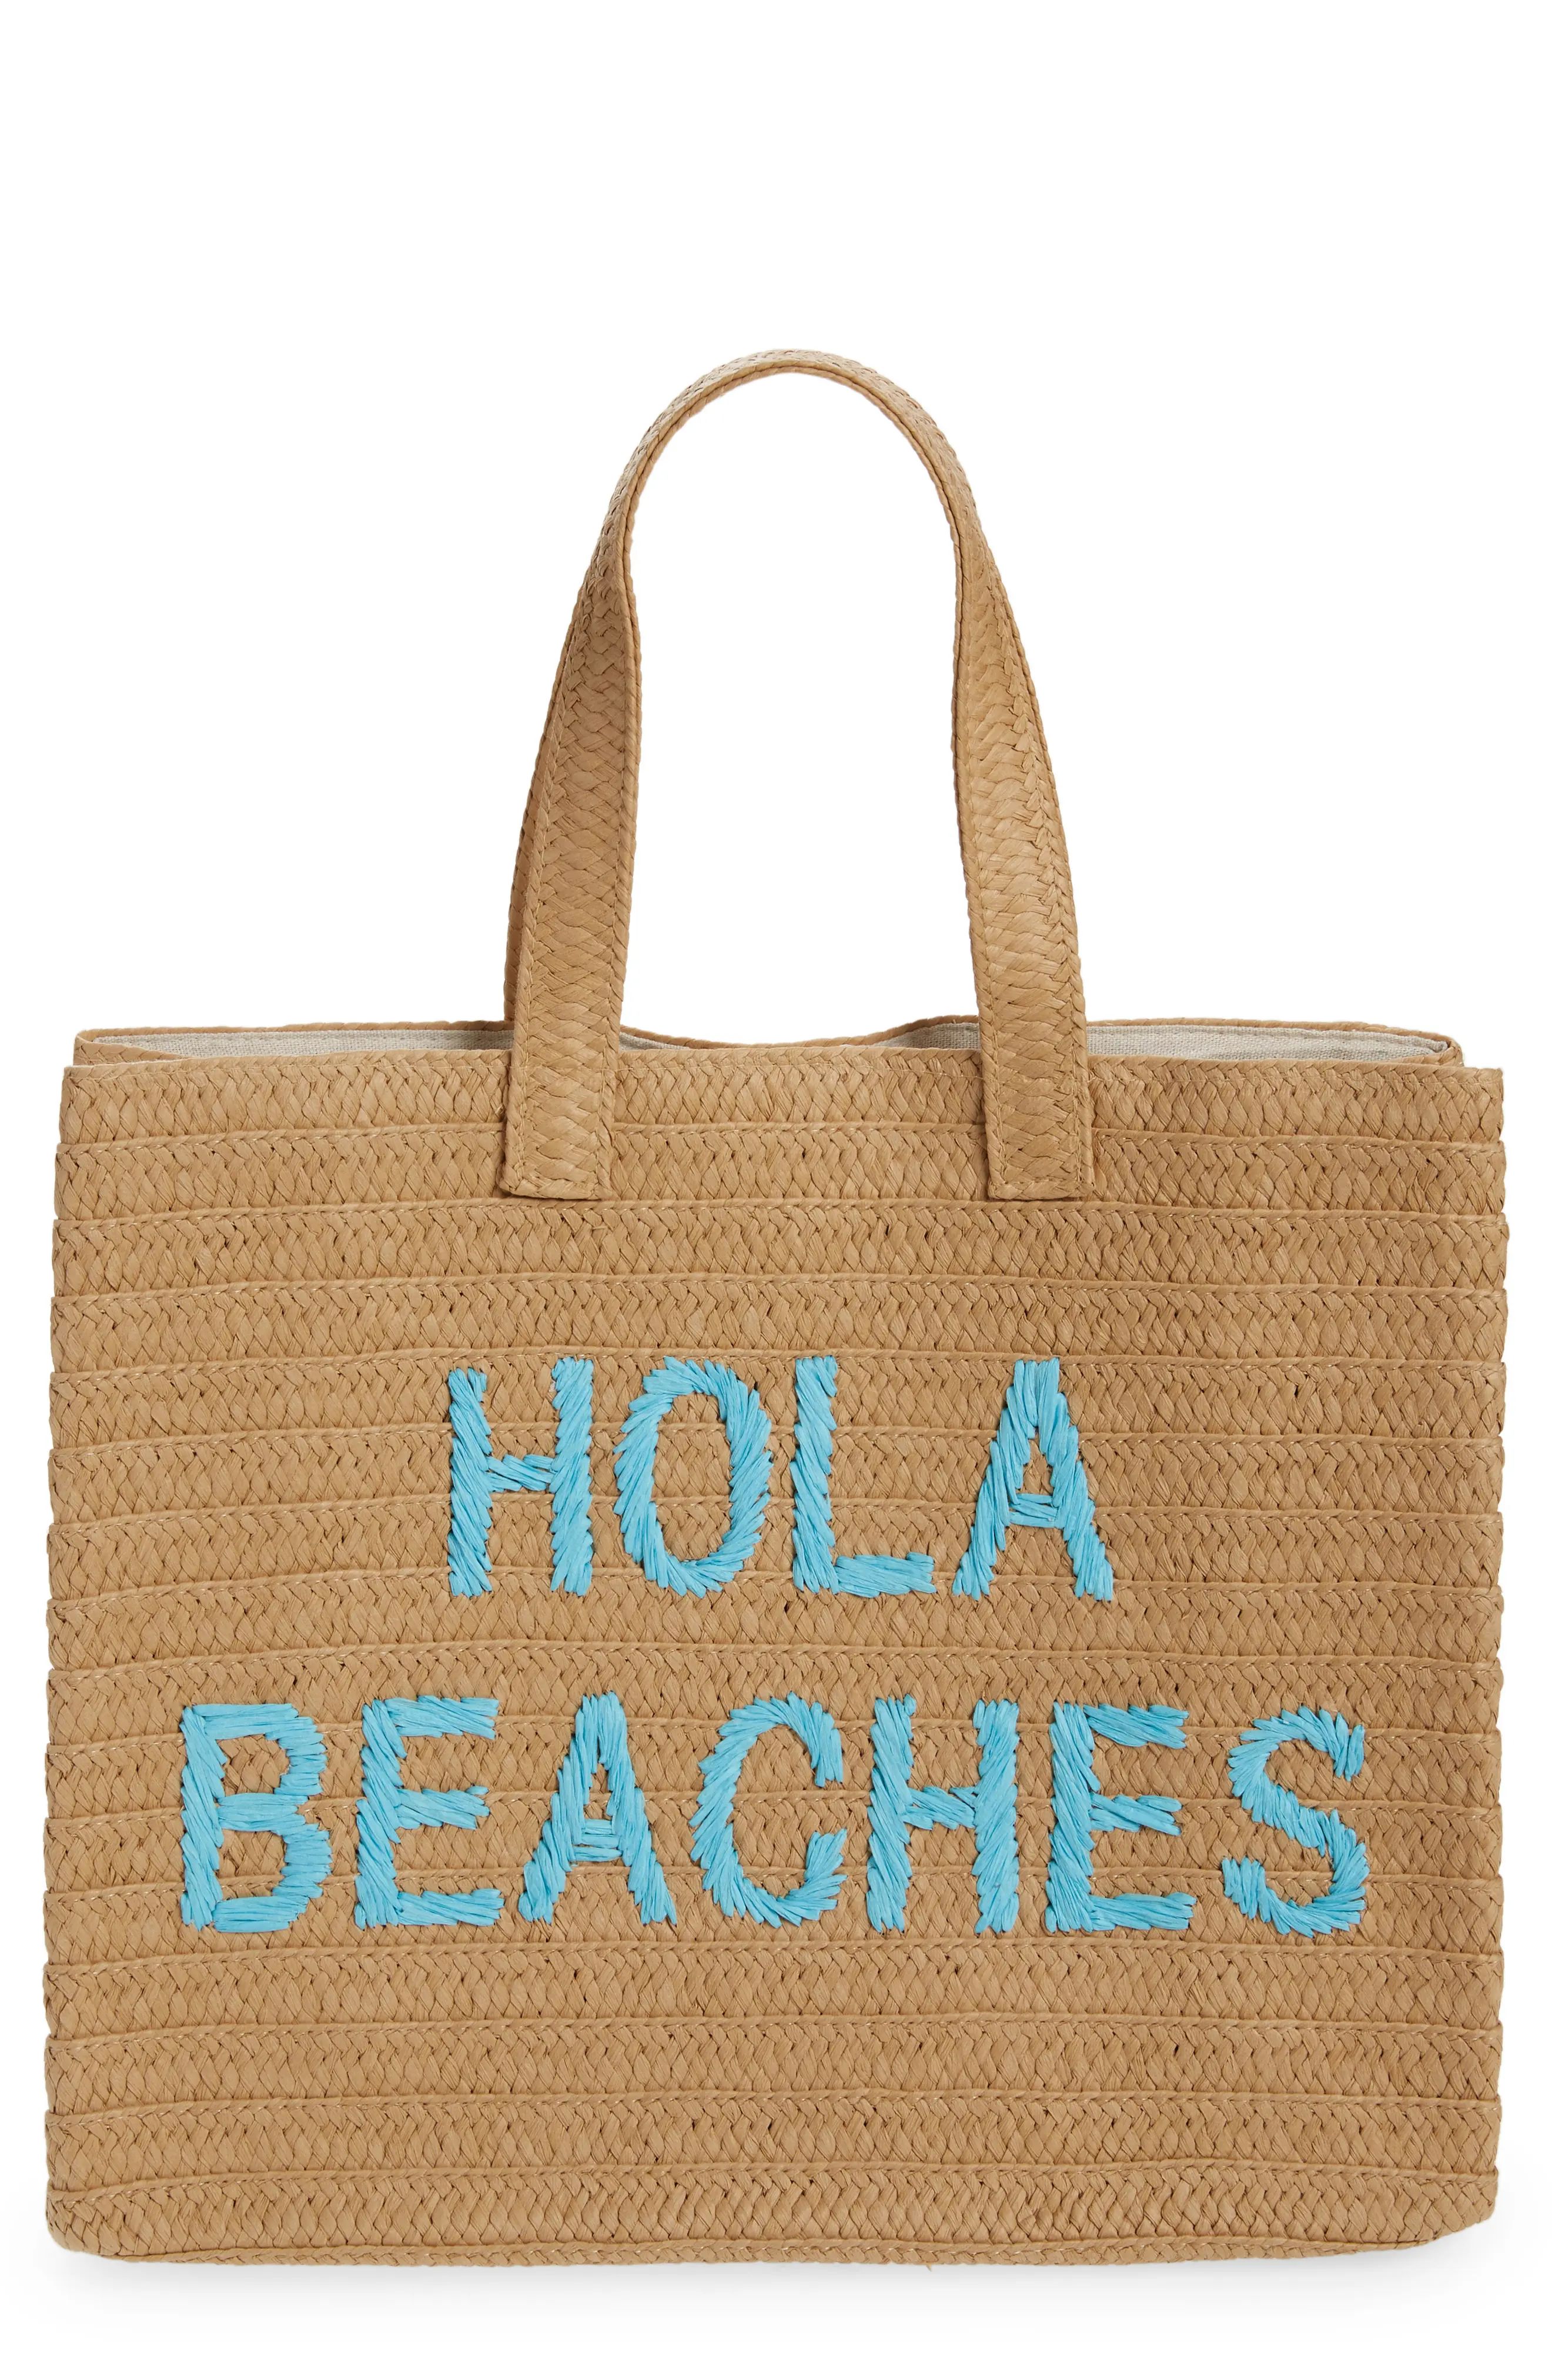 btb Los Angeles Hola Beaches Straw Tote in Sand/Aqua at Nordstrom | Nordstrom